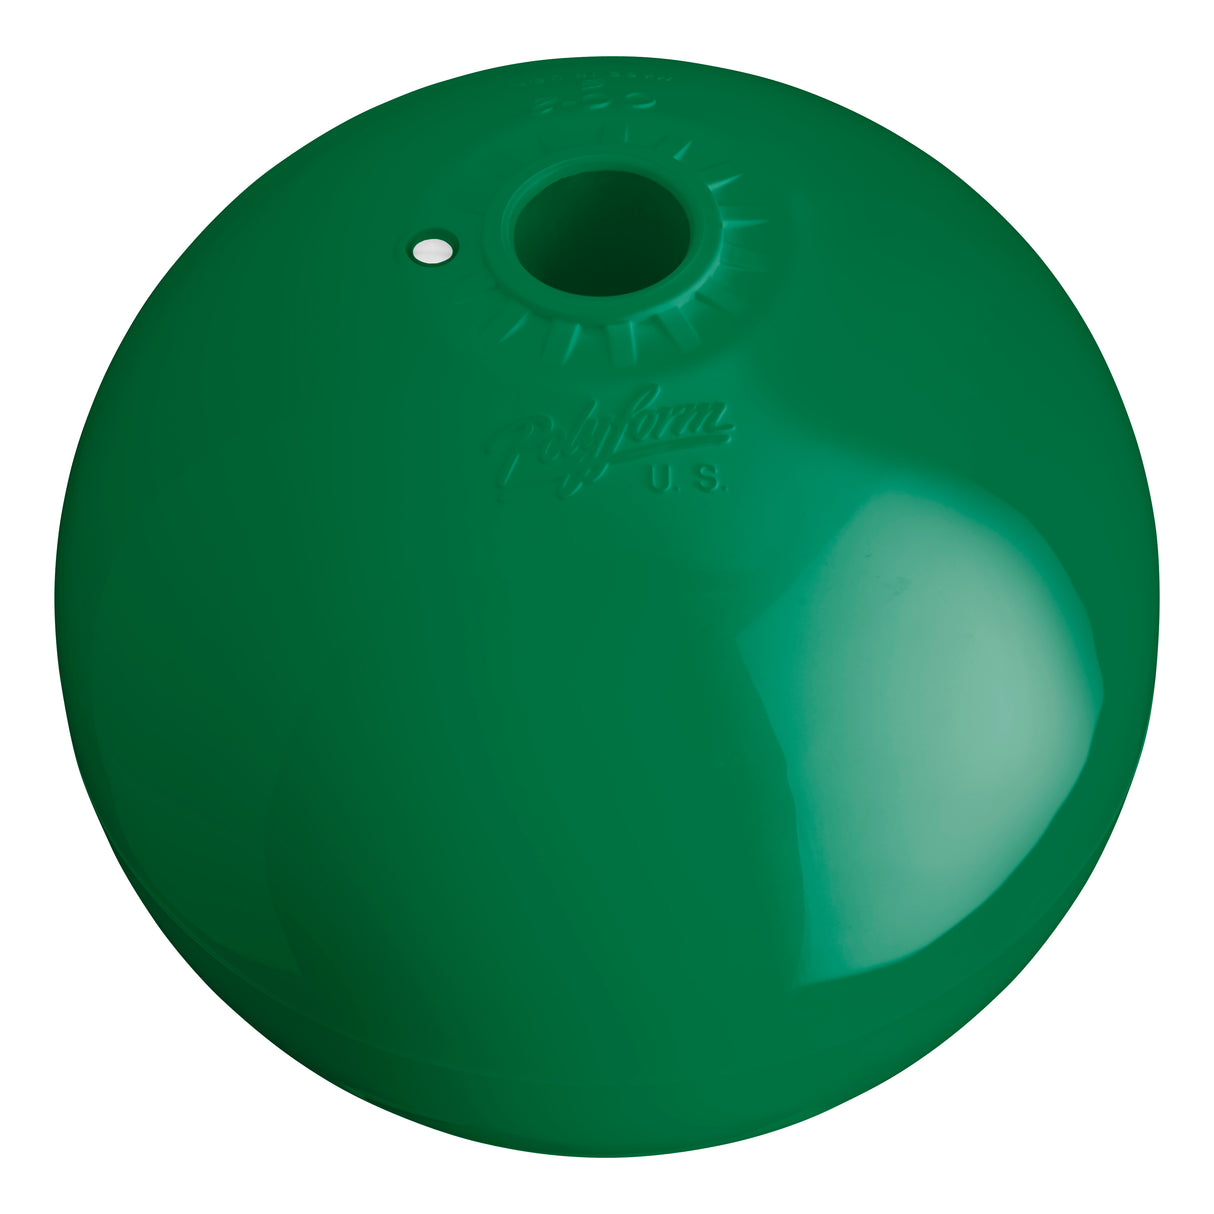 Hole through center mooring and marker buoy, Polyform CC-6 Forest Green angled shot